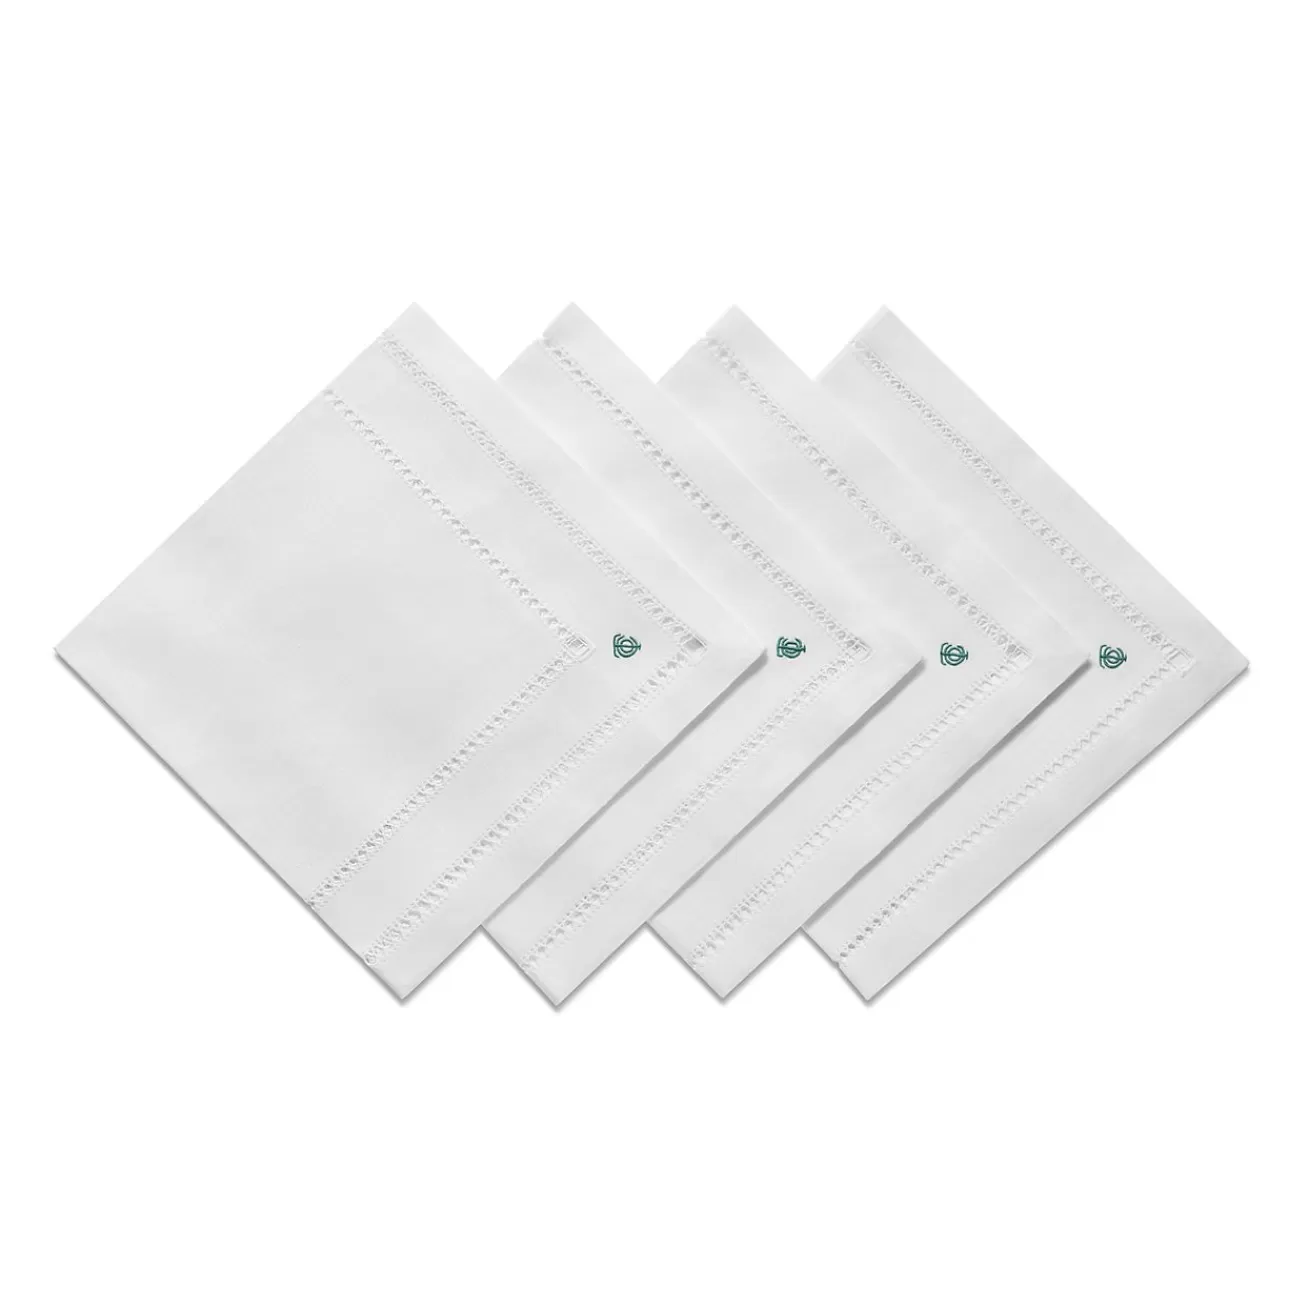 Tiffany & Co. Tiffany Heritage Napkins Set of Four, in White Linen | ^ Table Linens